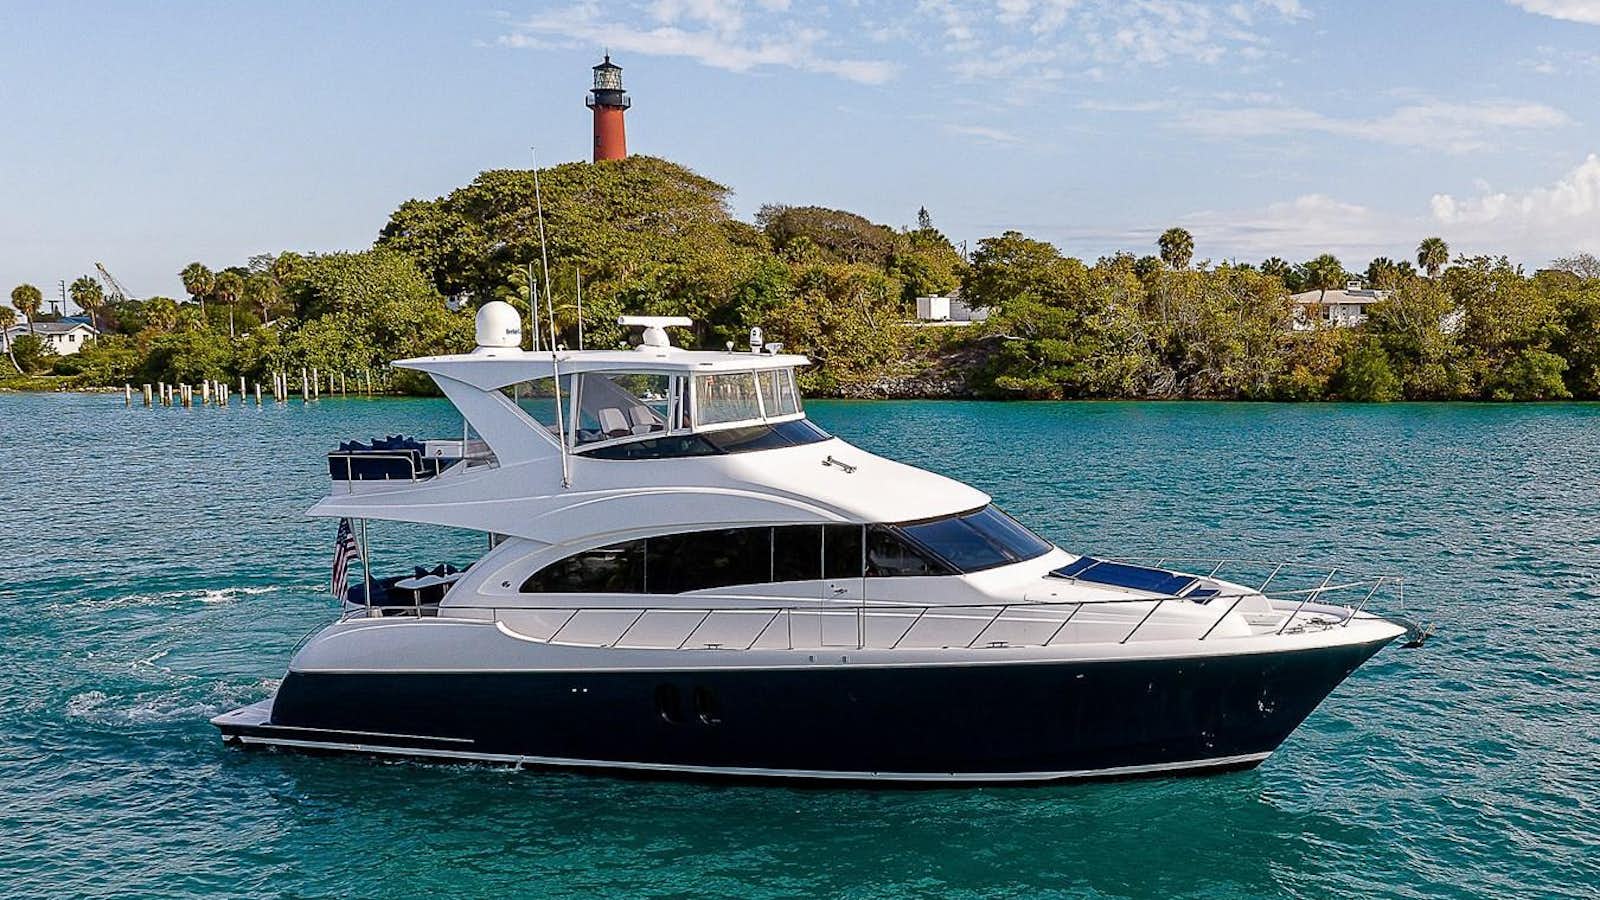 Waterfront
Yacht for Sale